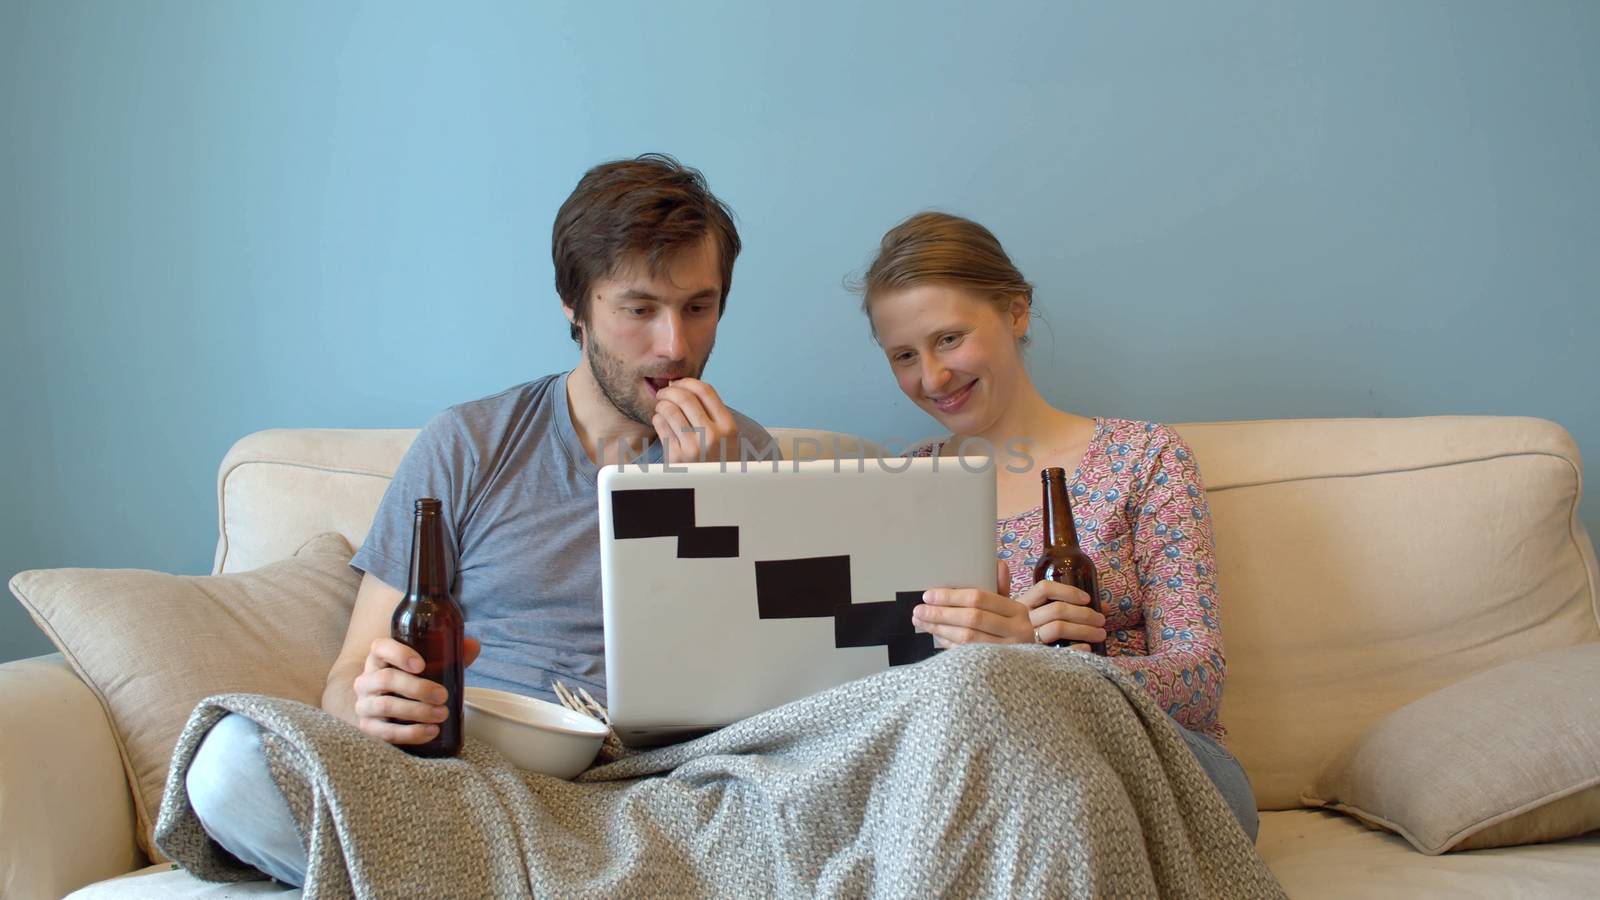 Family drinking beer on the couch and watching a movie or broadcast on a computer. Happy couple in a cozy room on the sofa under the plaid